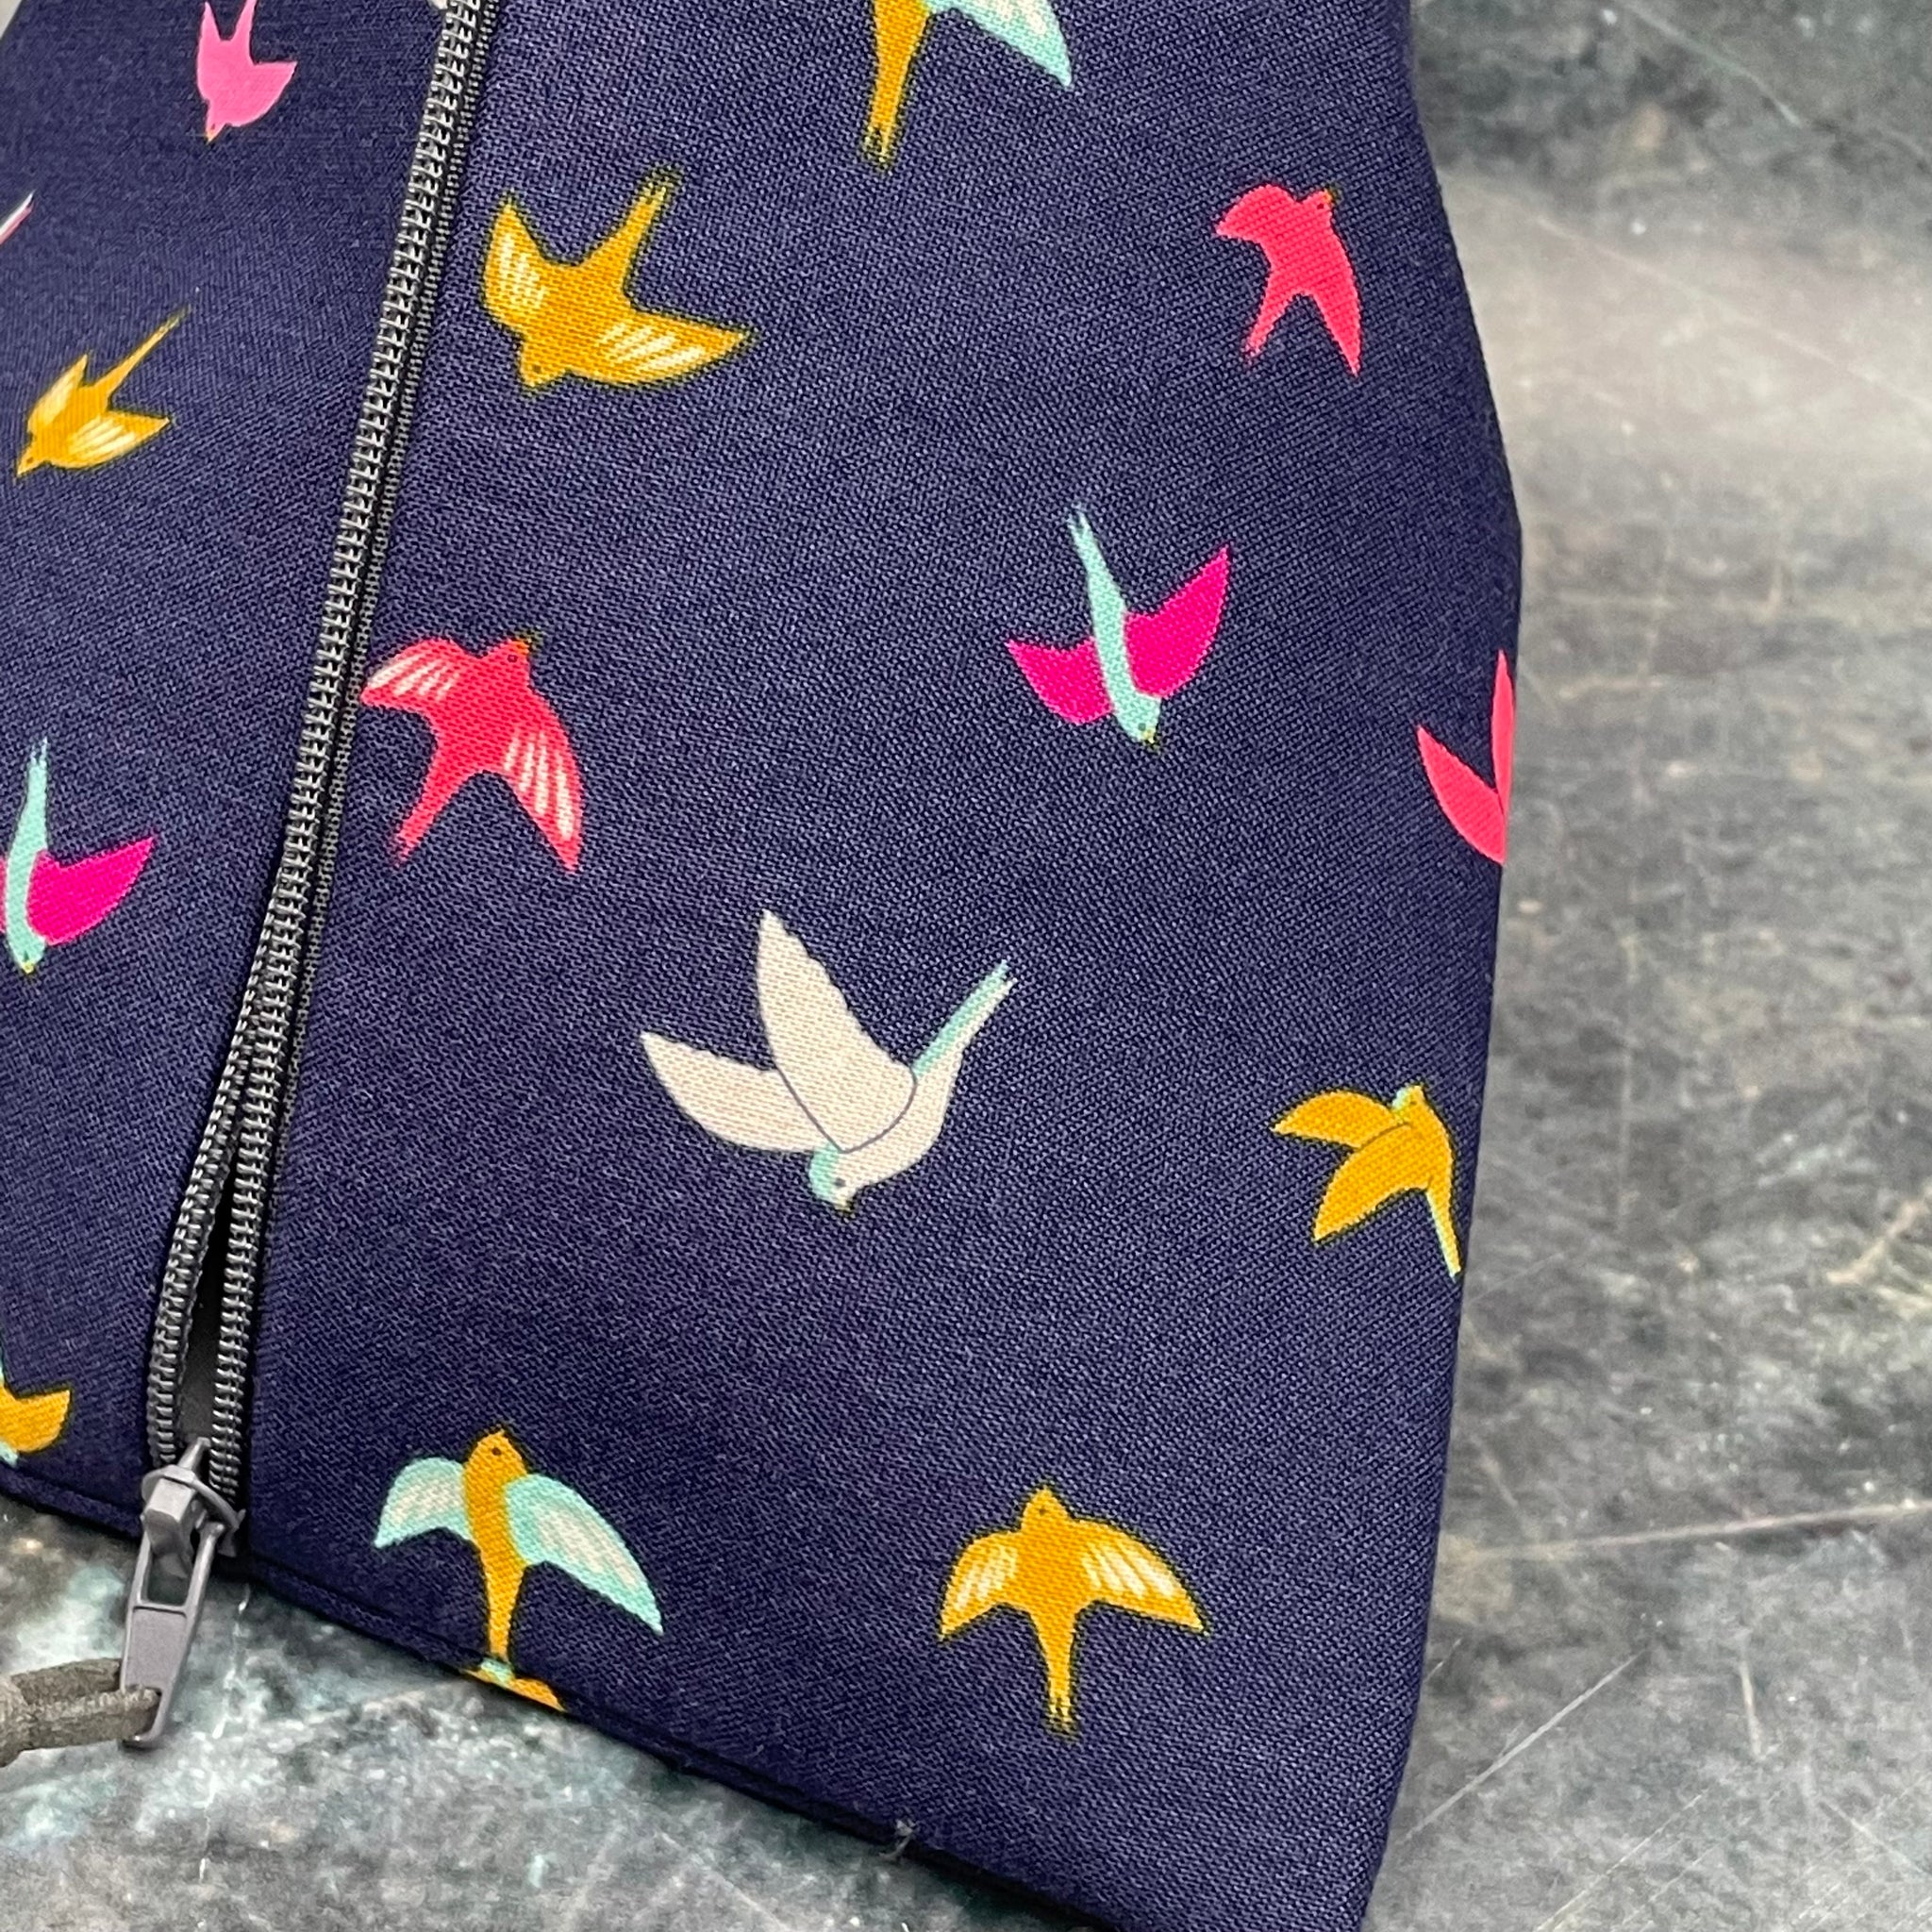 Swallows - Handmade Cotton Project Bags